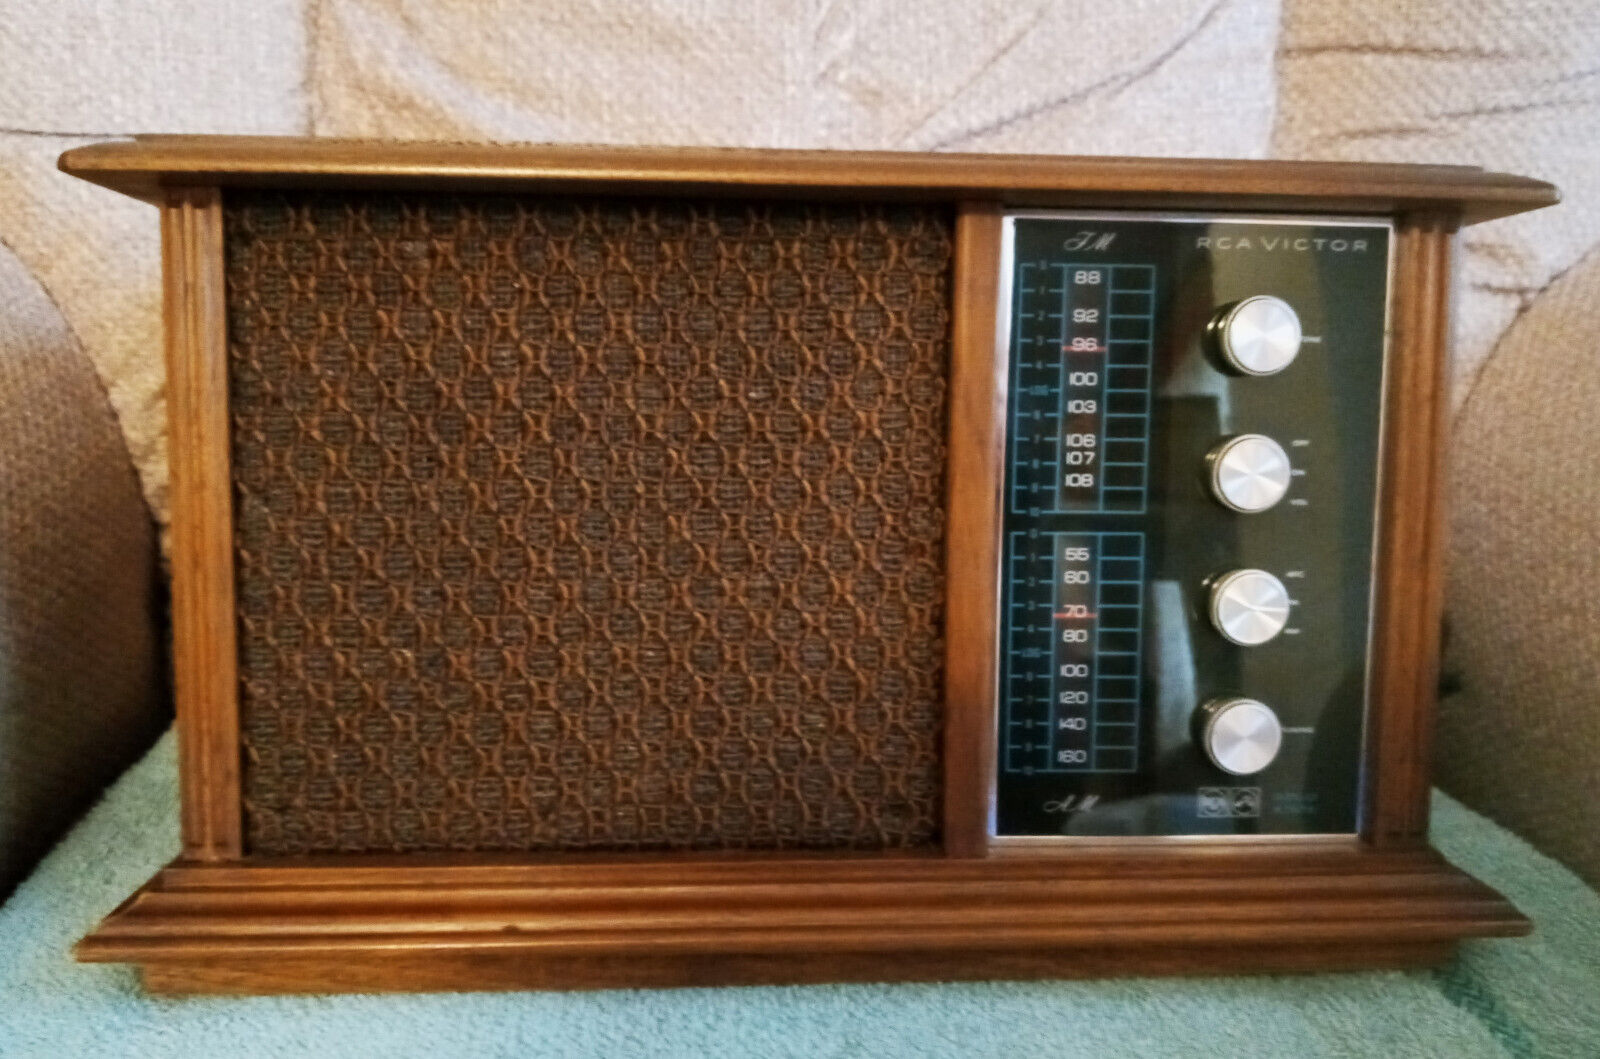 Vintage 1960's RCA VICTOR SOLID STATE RADIO RJC36-S PECAN FINISH TESTED